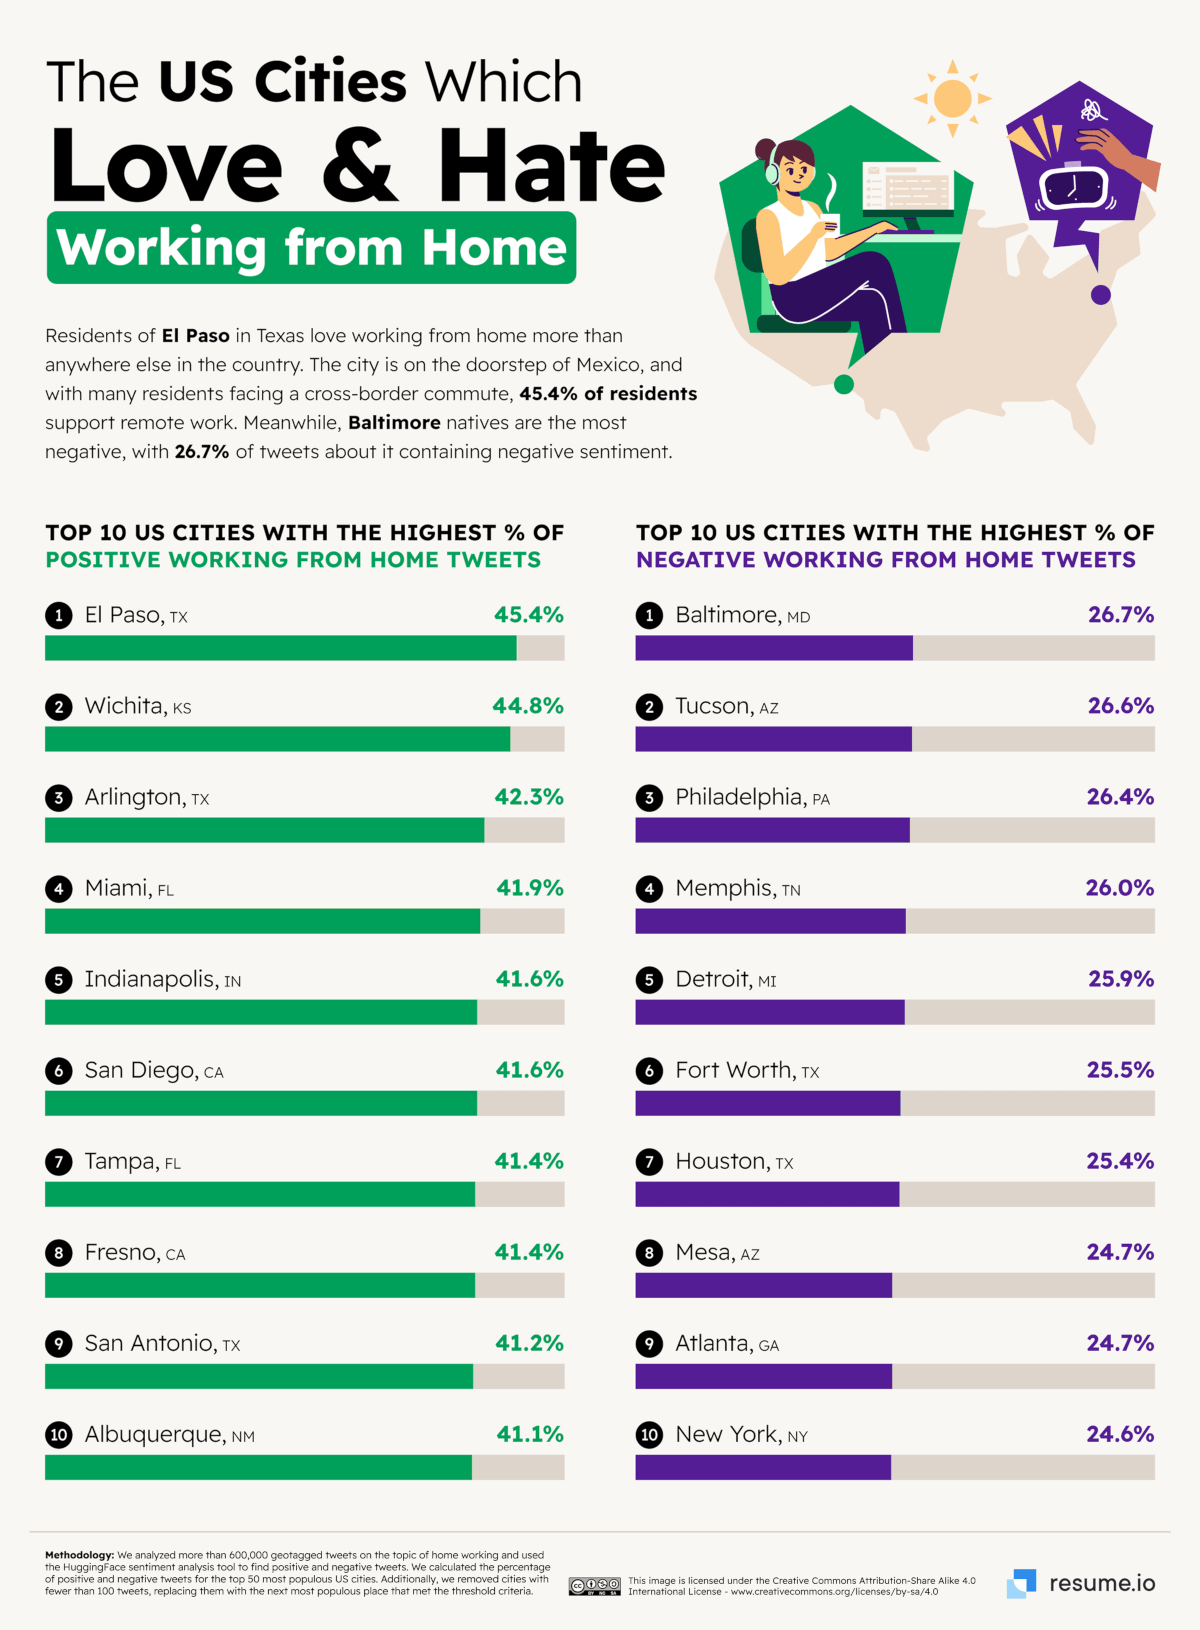 Overall chart from Resume.io showing the US cities which love and hate WFH